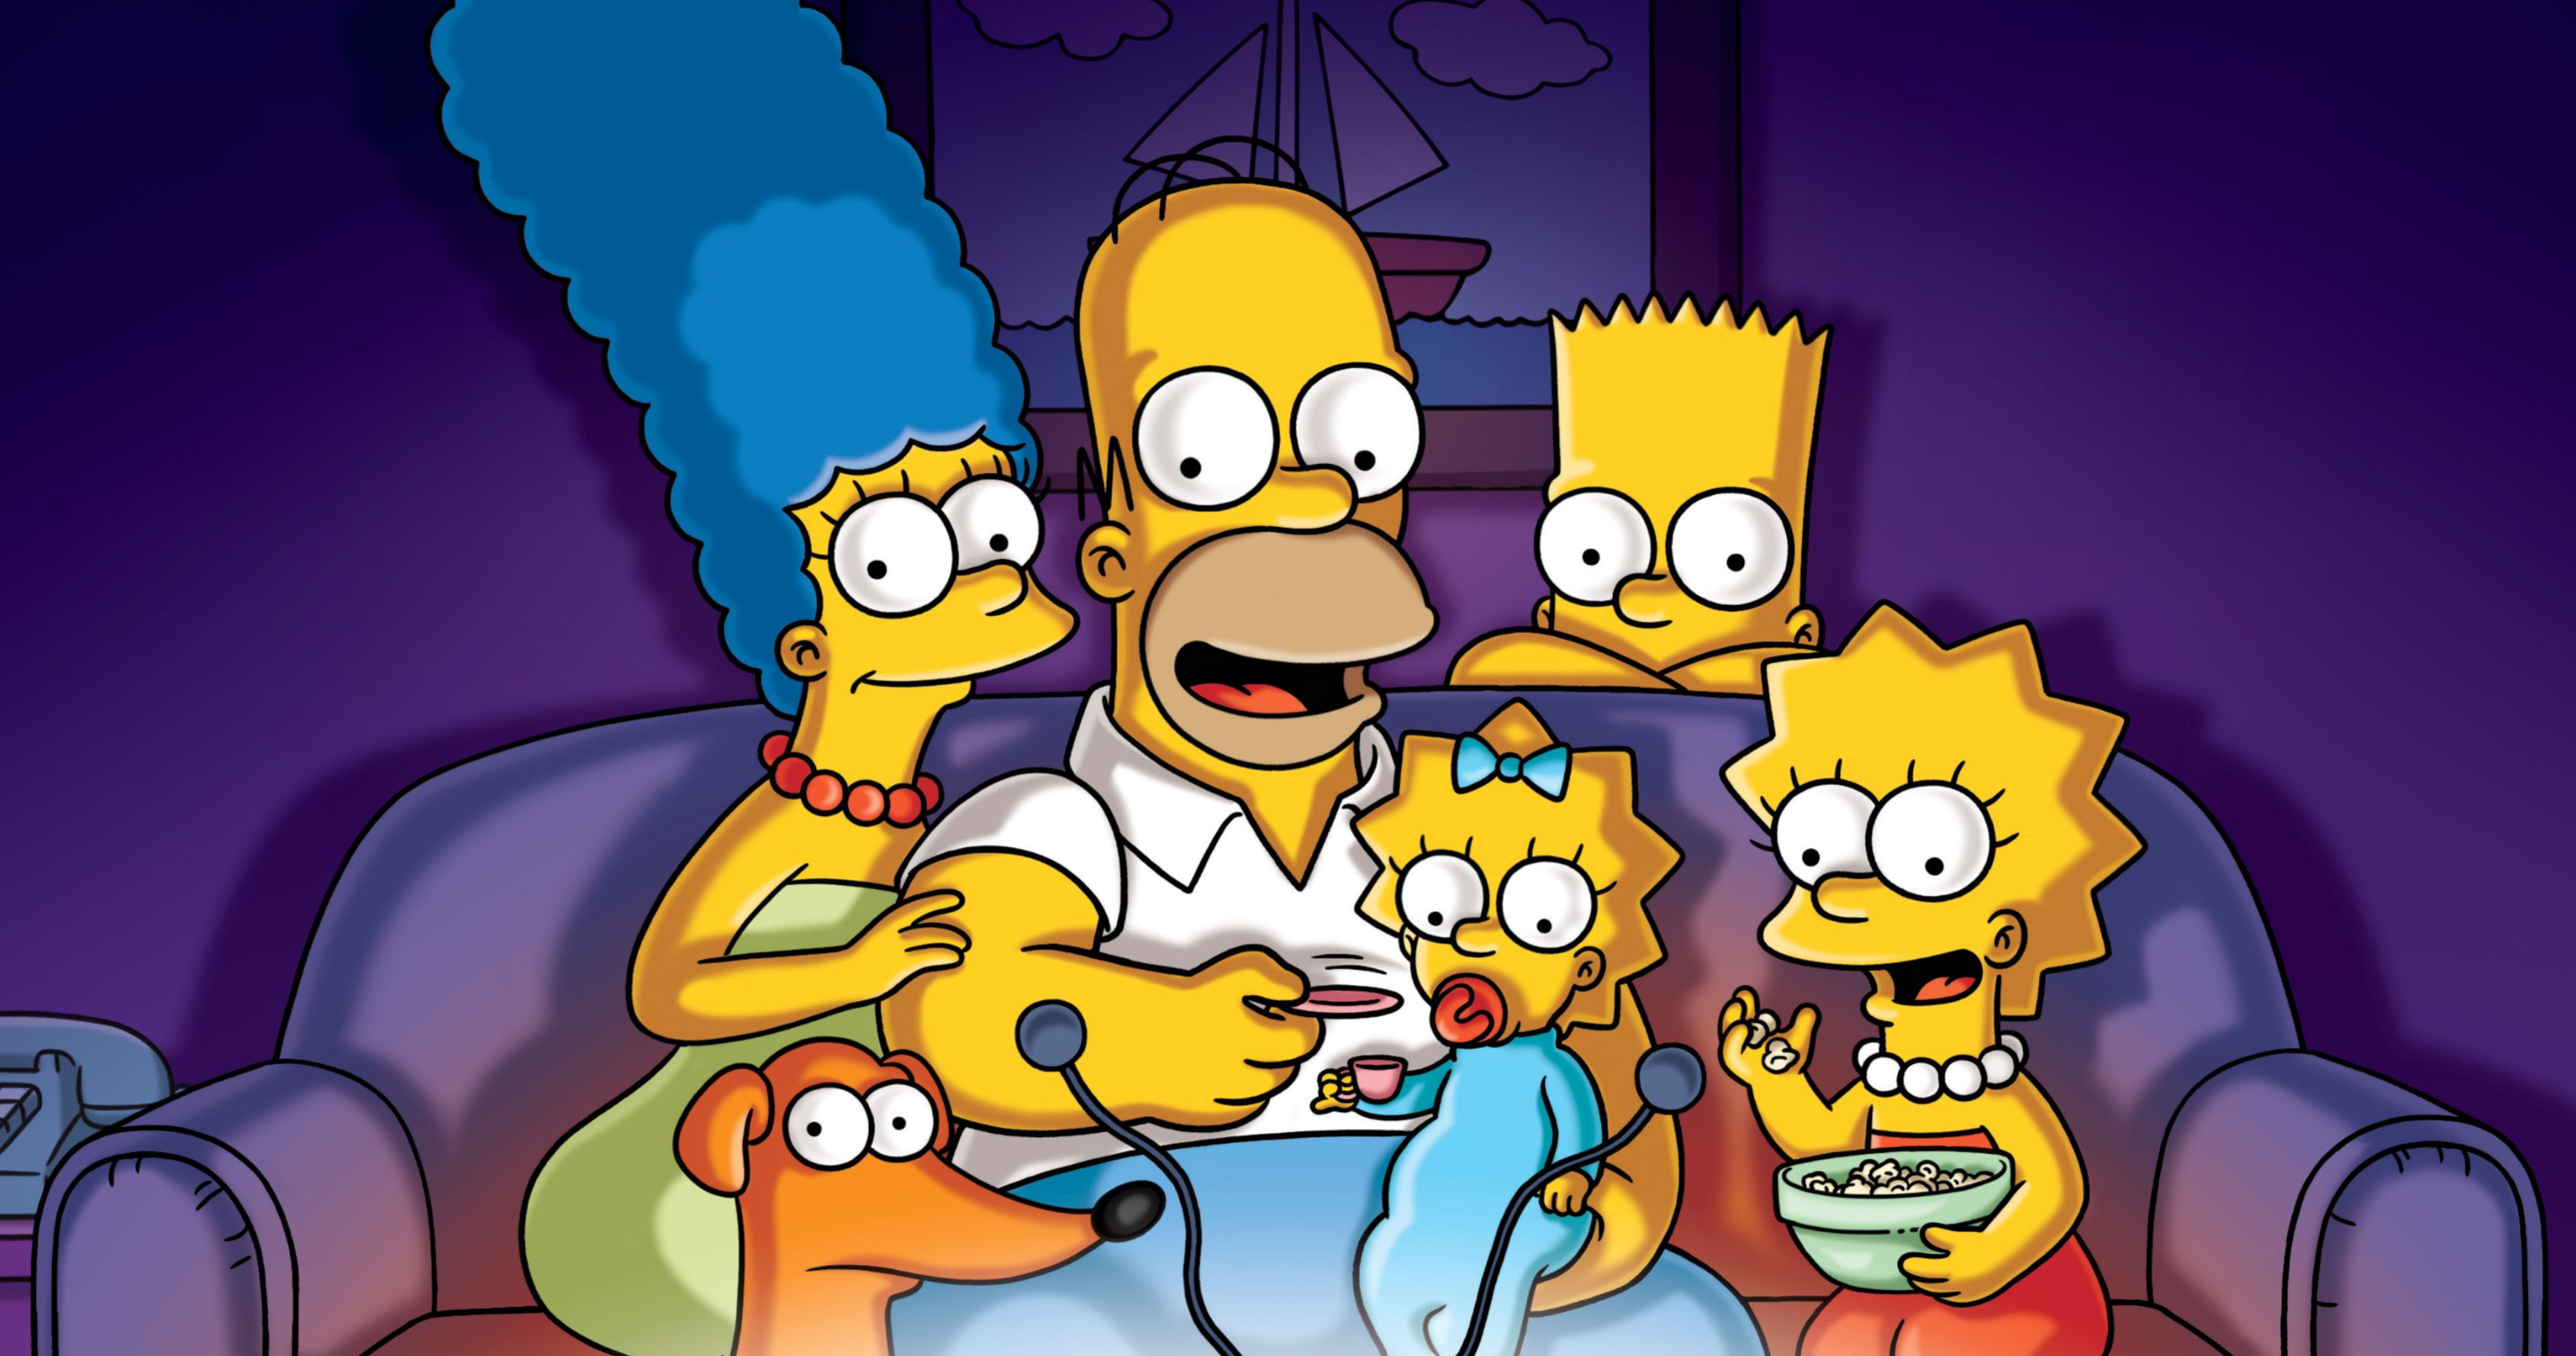 The Simpsons Set to Take Over Disney's D23 Expo in Anaheim, CA